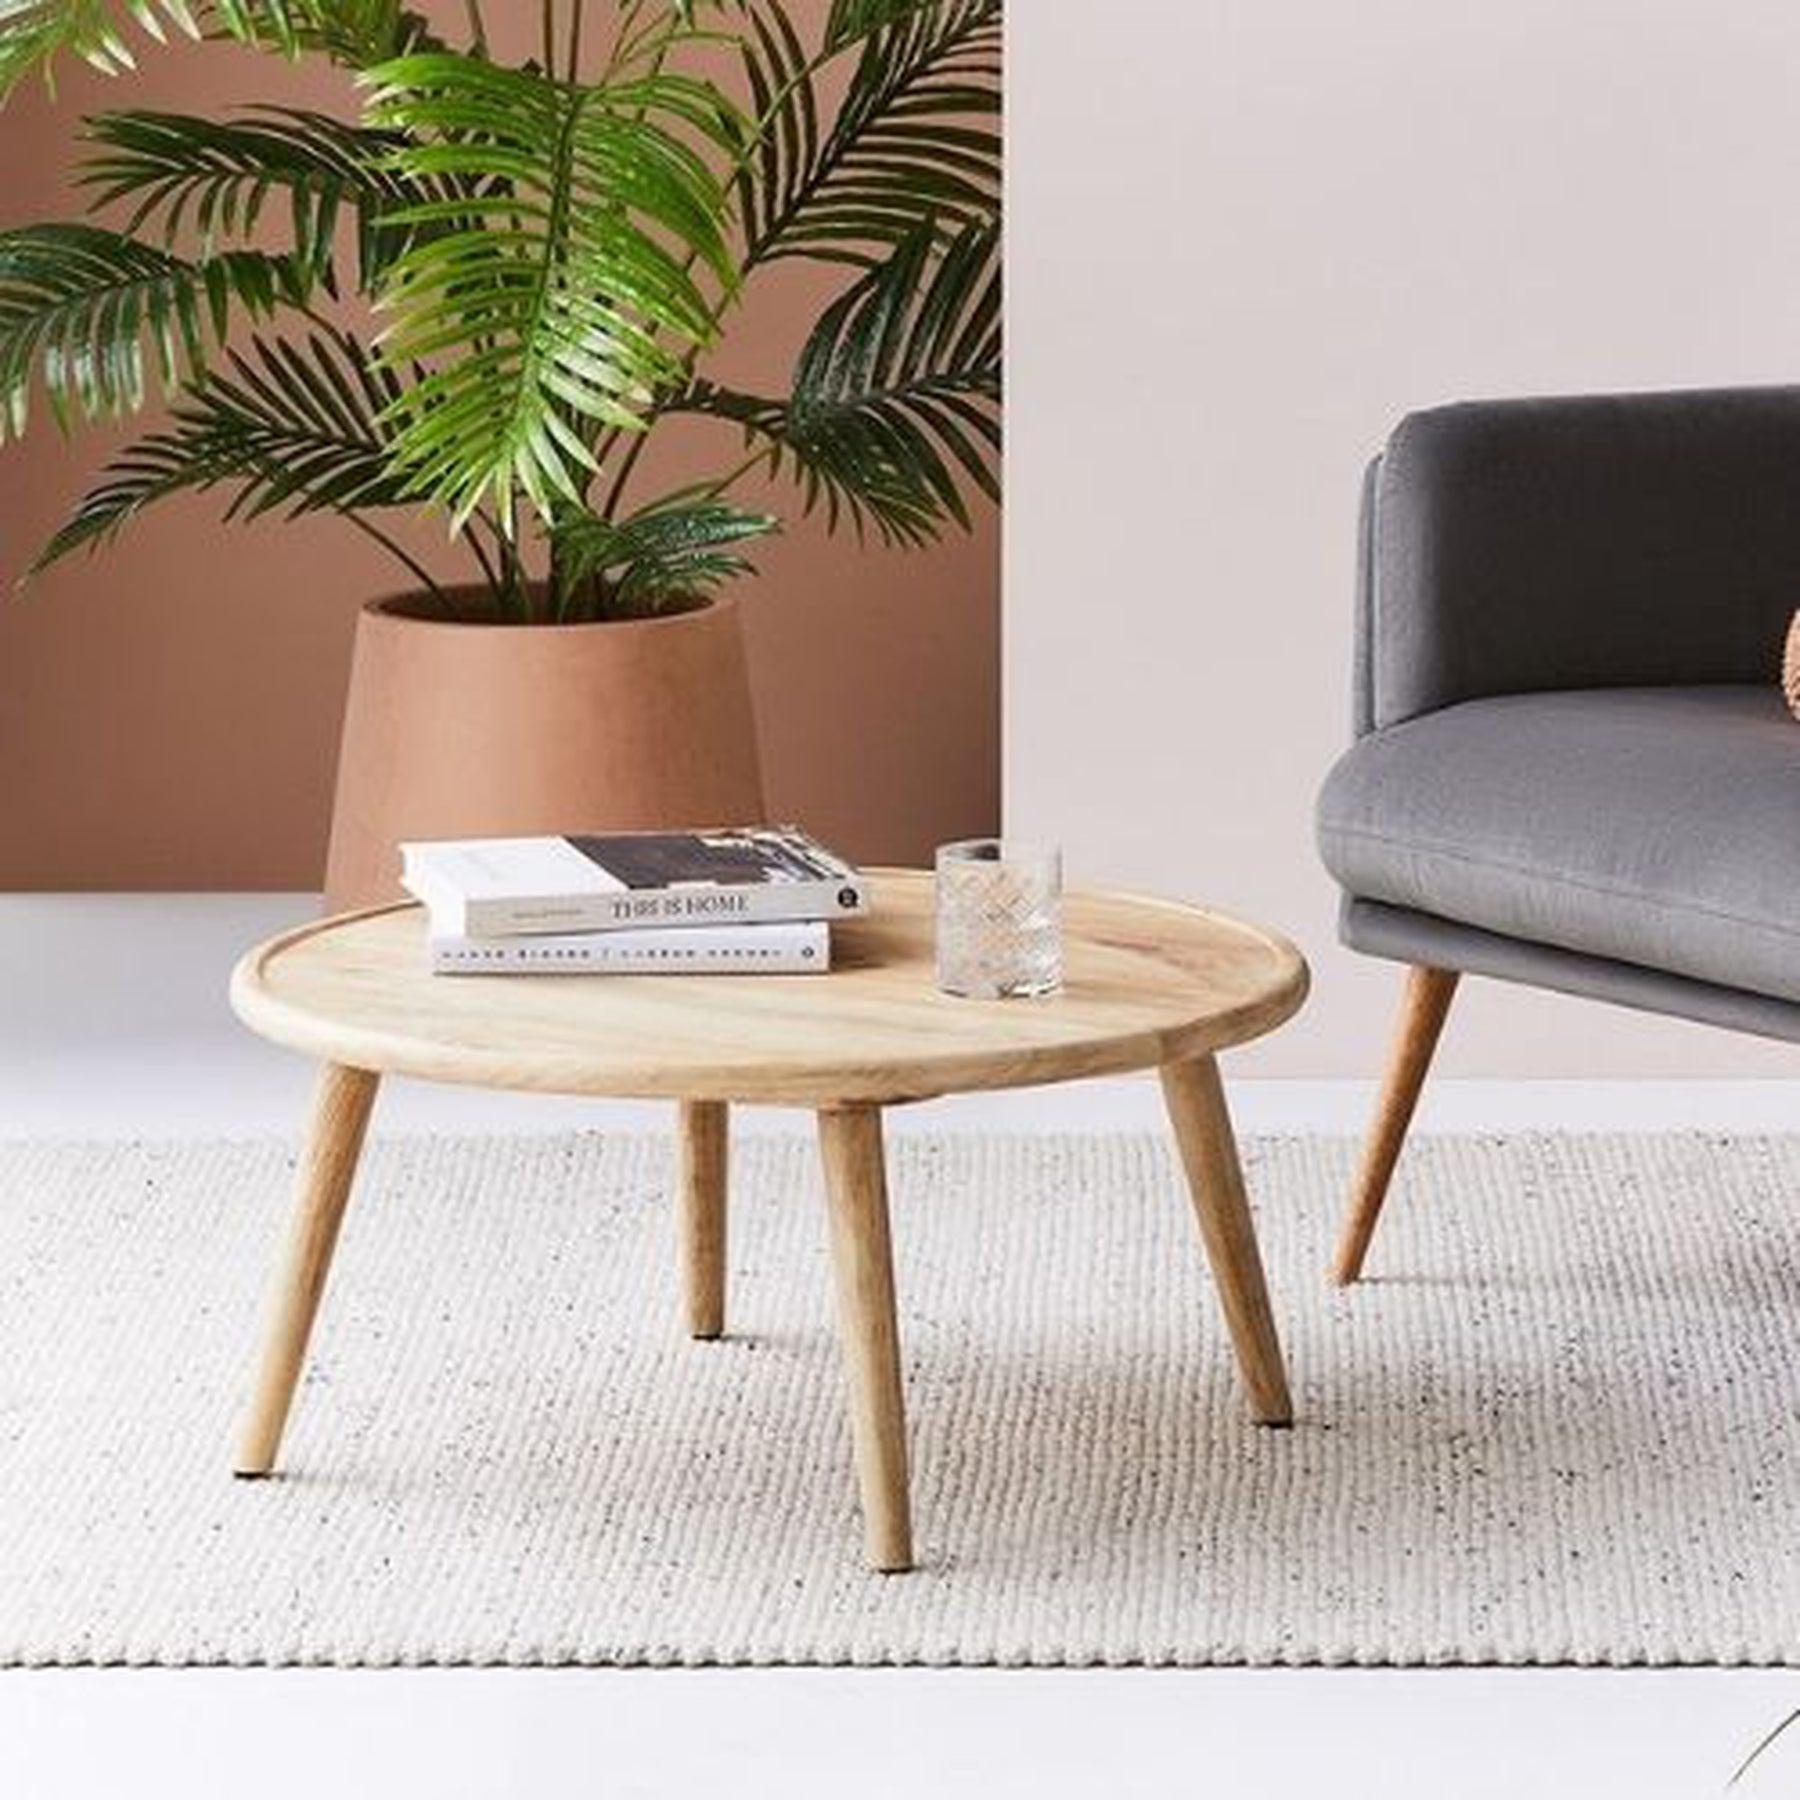 Retro Round Large Solid Wood Coffee Table | 30x30x14 inches